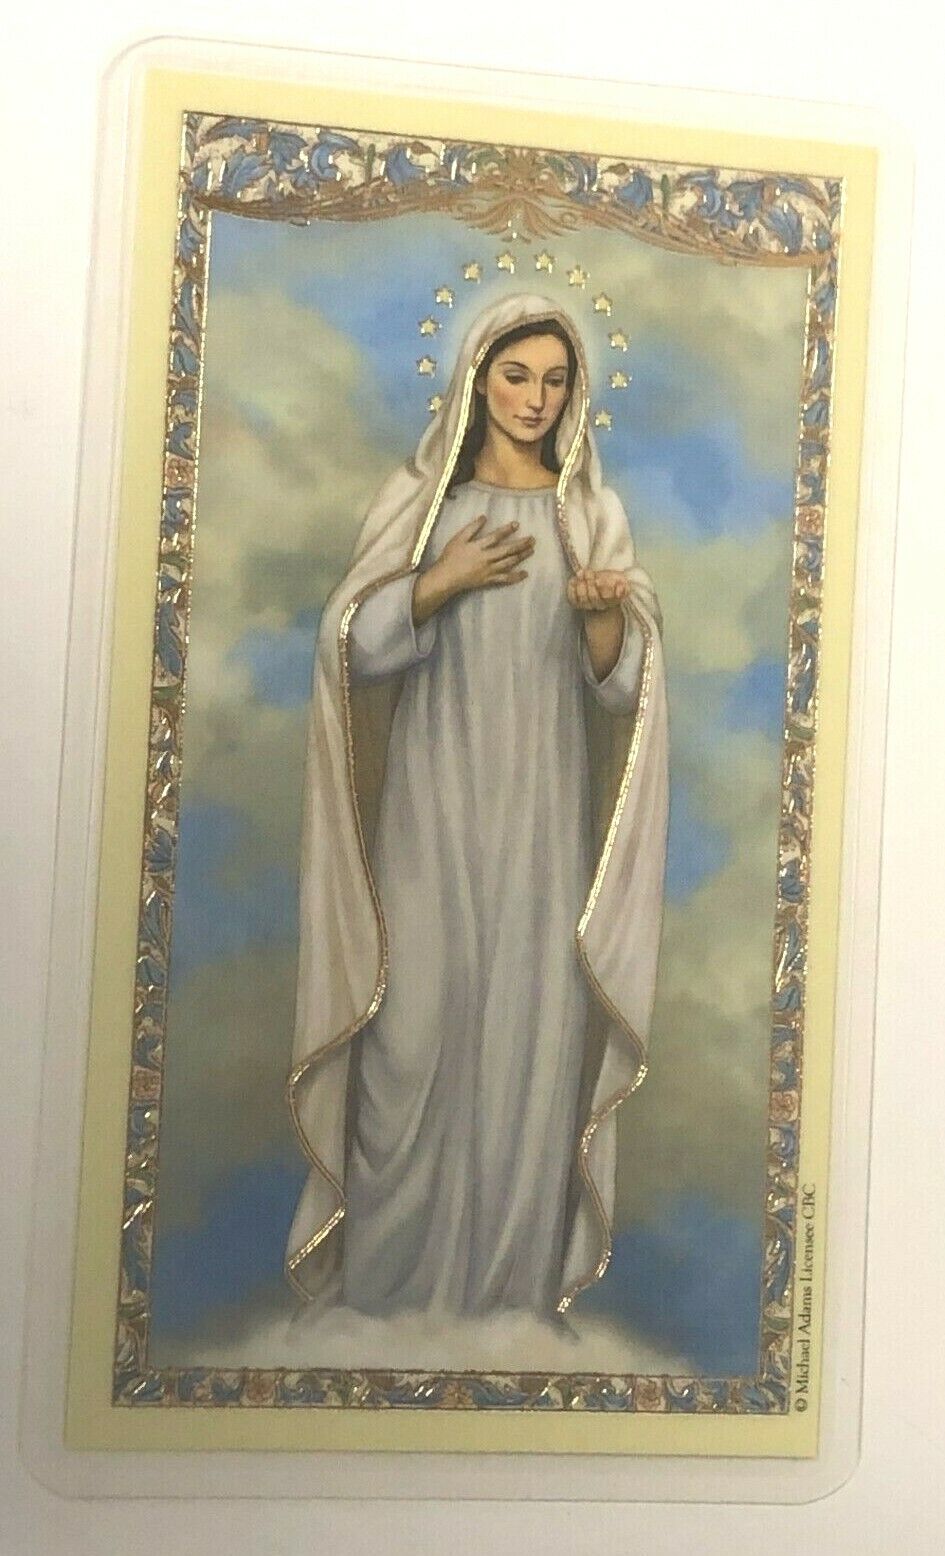 Our Lady of Medjugorje Laminated Prayer Card, New - Bob and Penny Lord